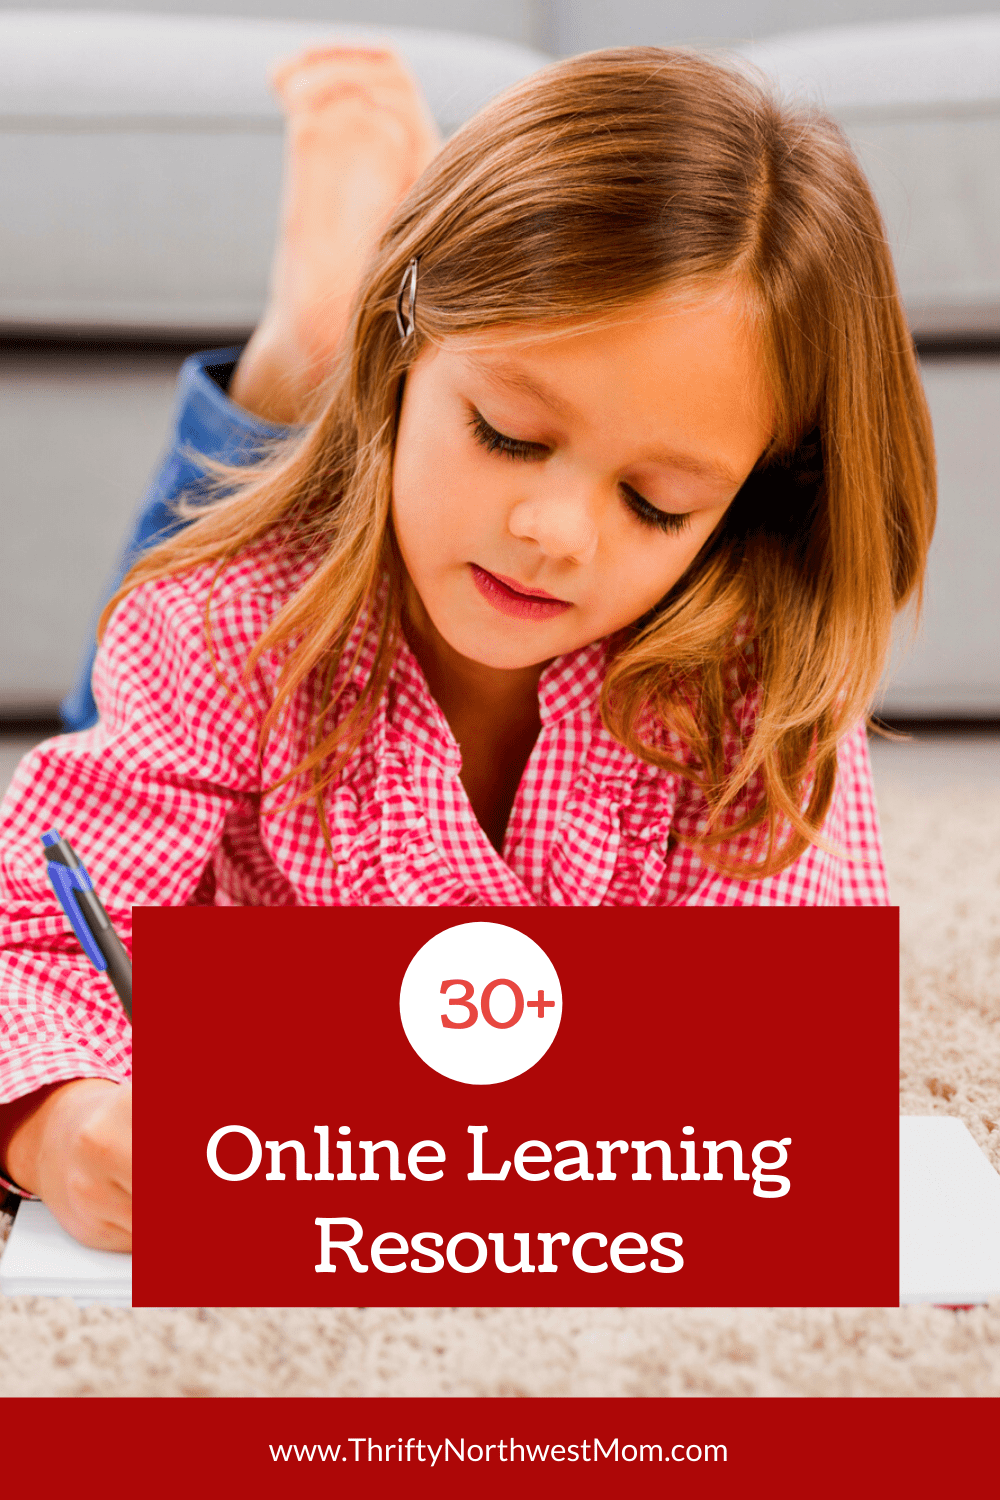 30+ Online Learning Resources for Students